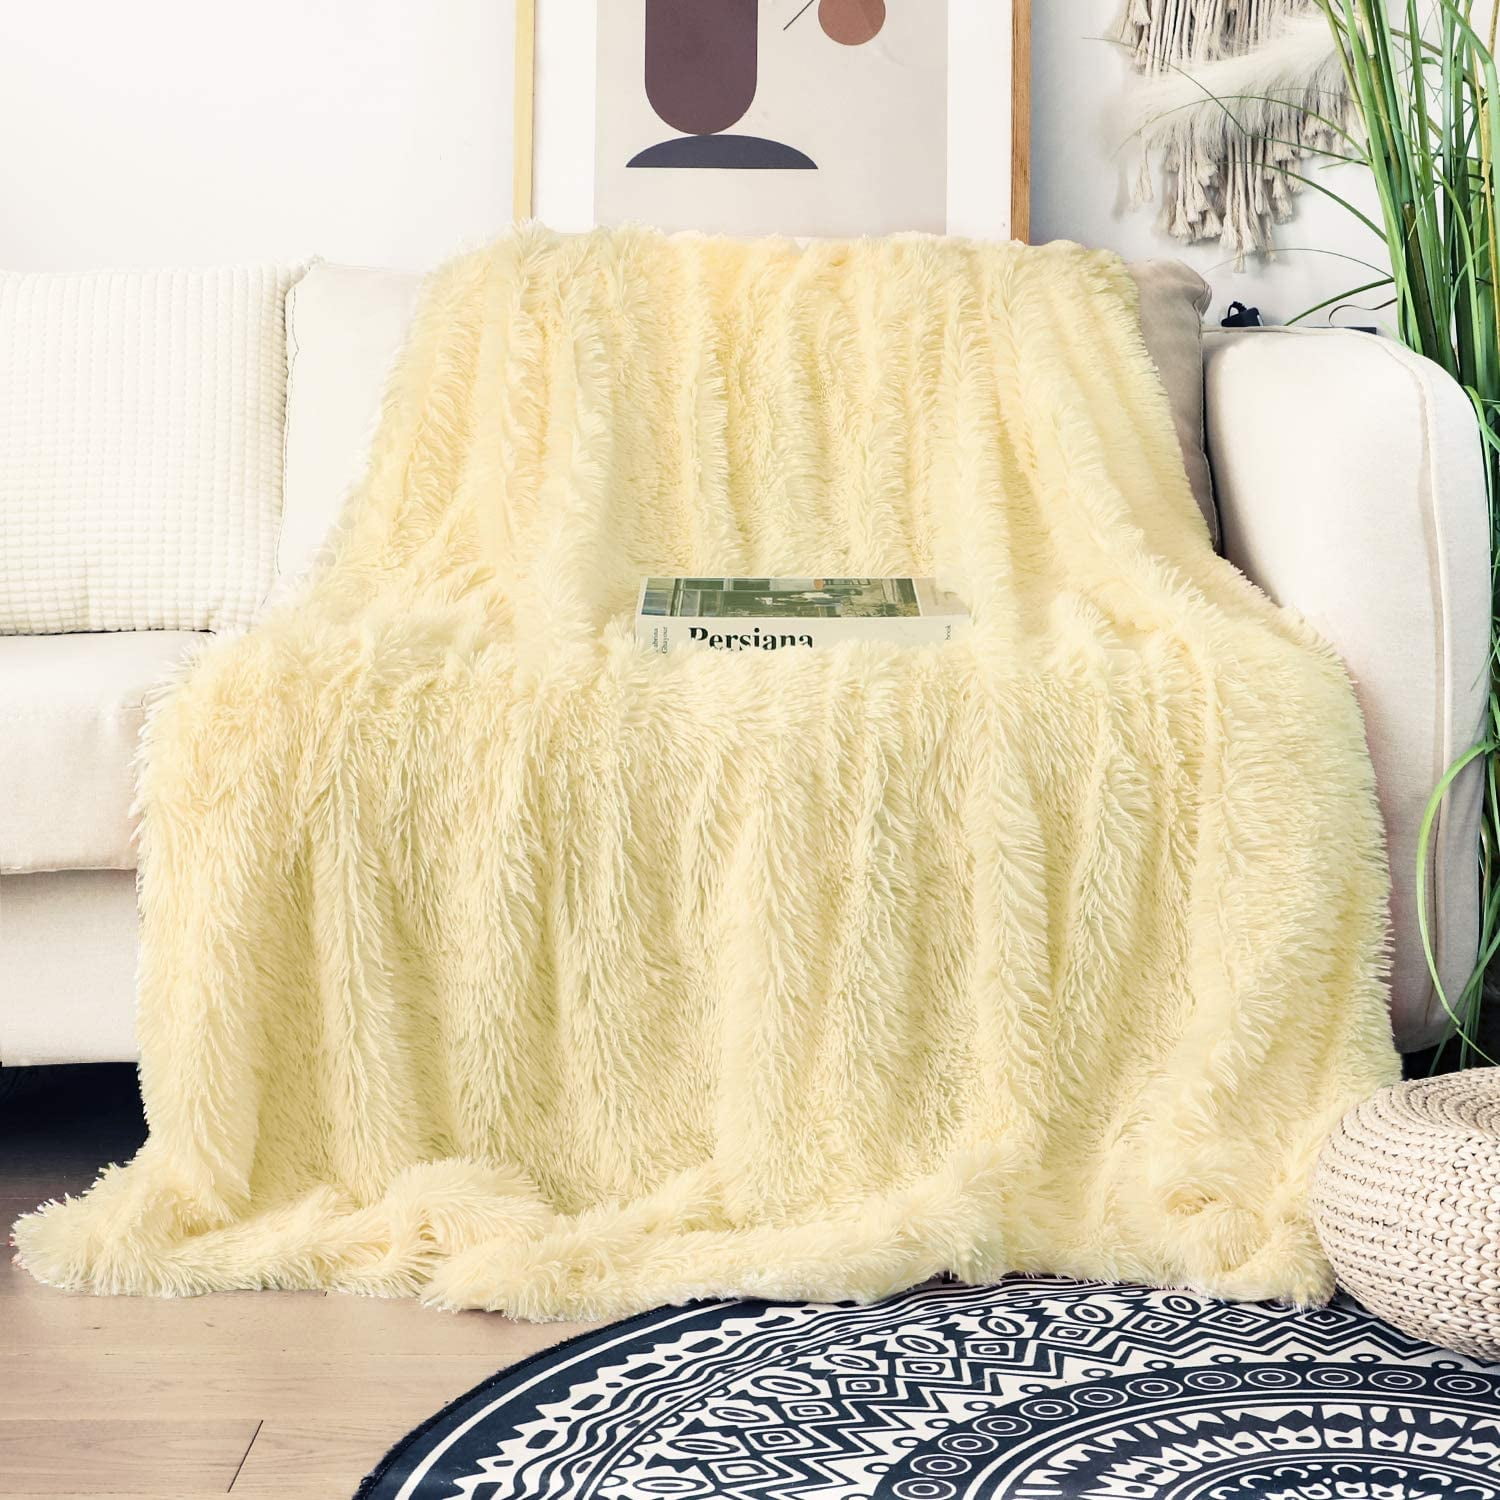 All Season Fluffy Micro-Fiber Blanket. Girl Adult Woman Sofa or Couch toss Fluffy Bed Blanket Super Soft Thick Micro-Hair Bed Blanket